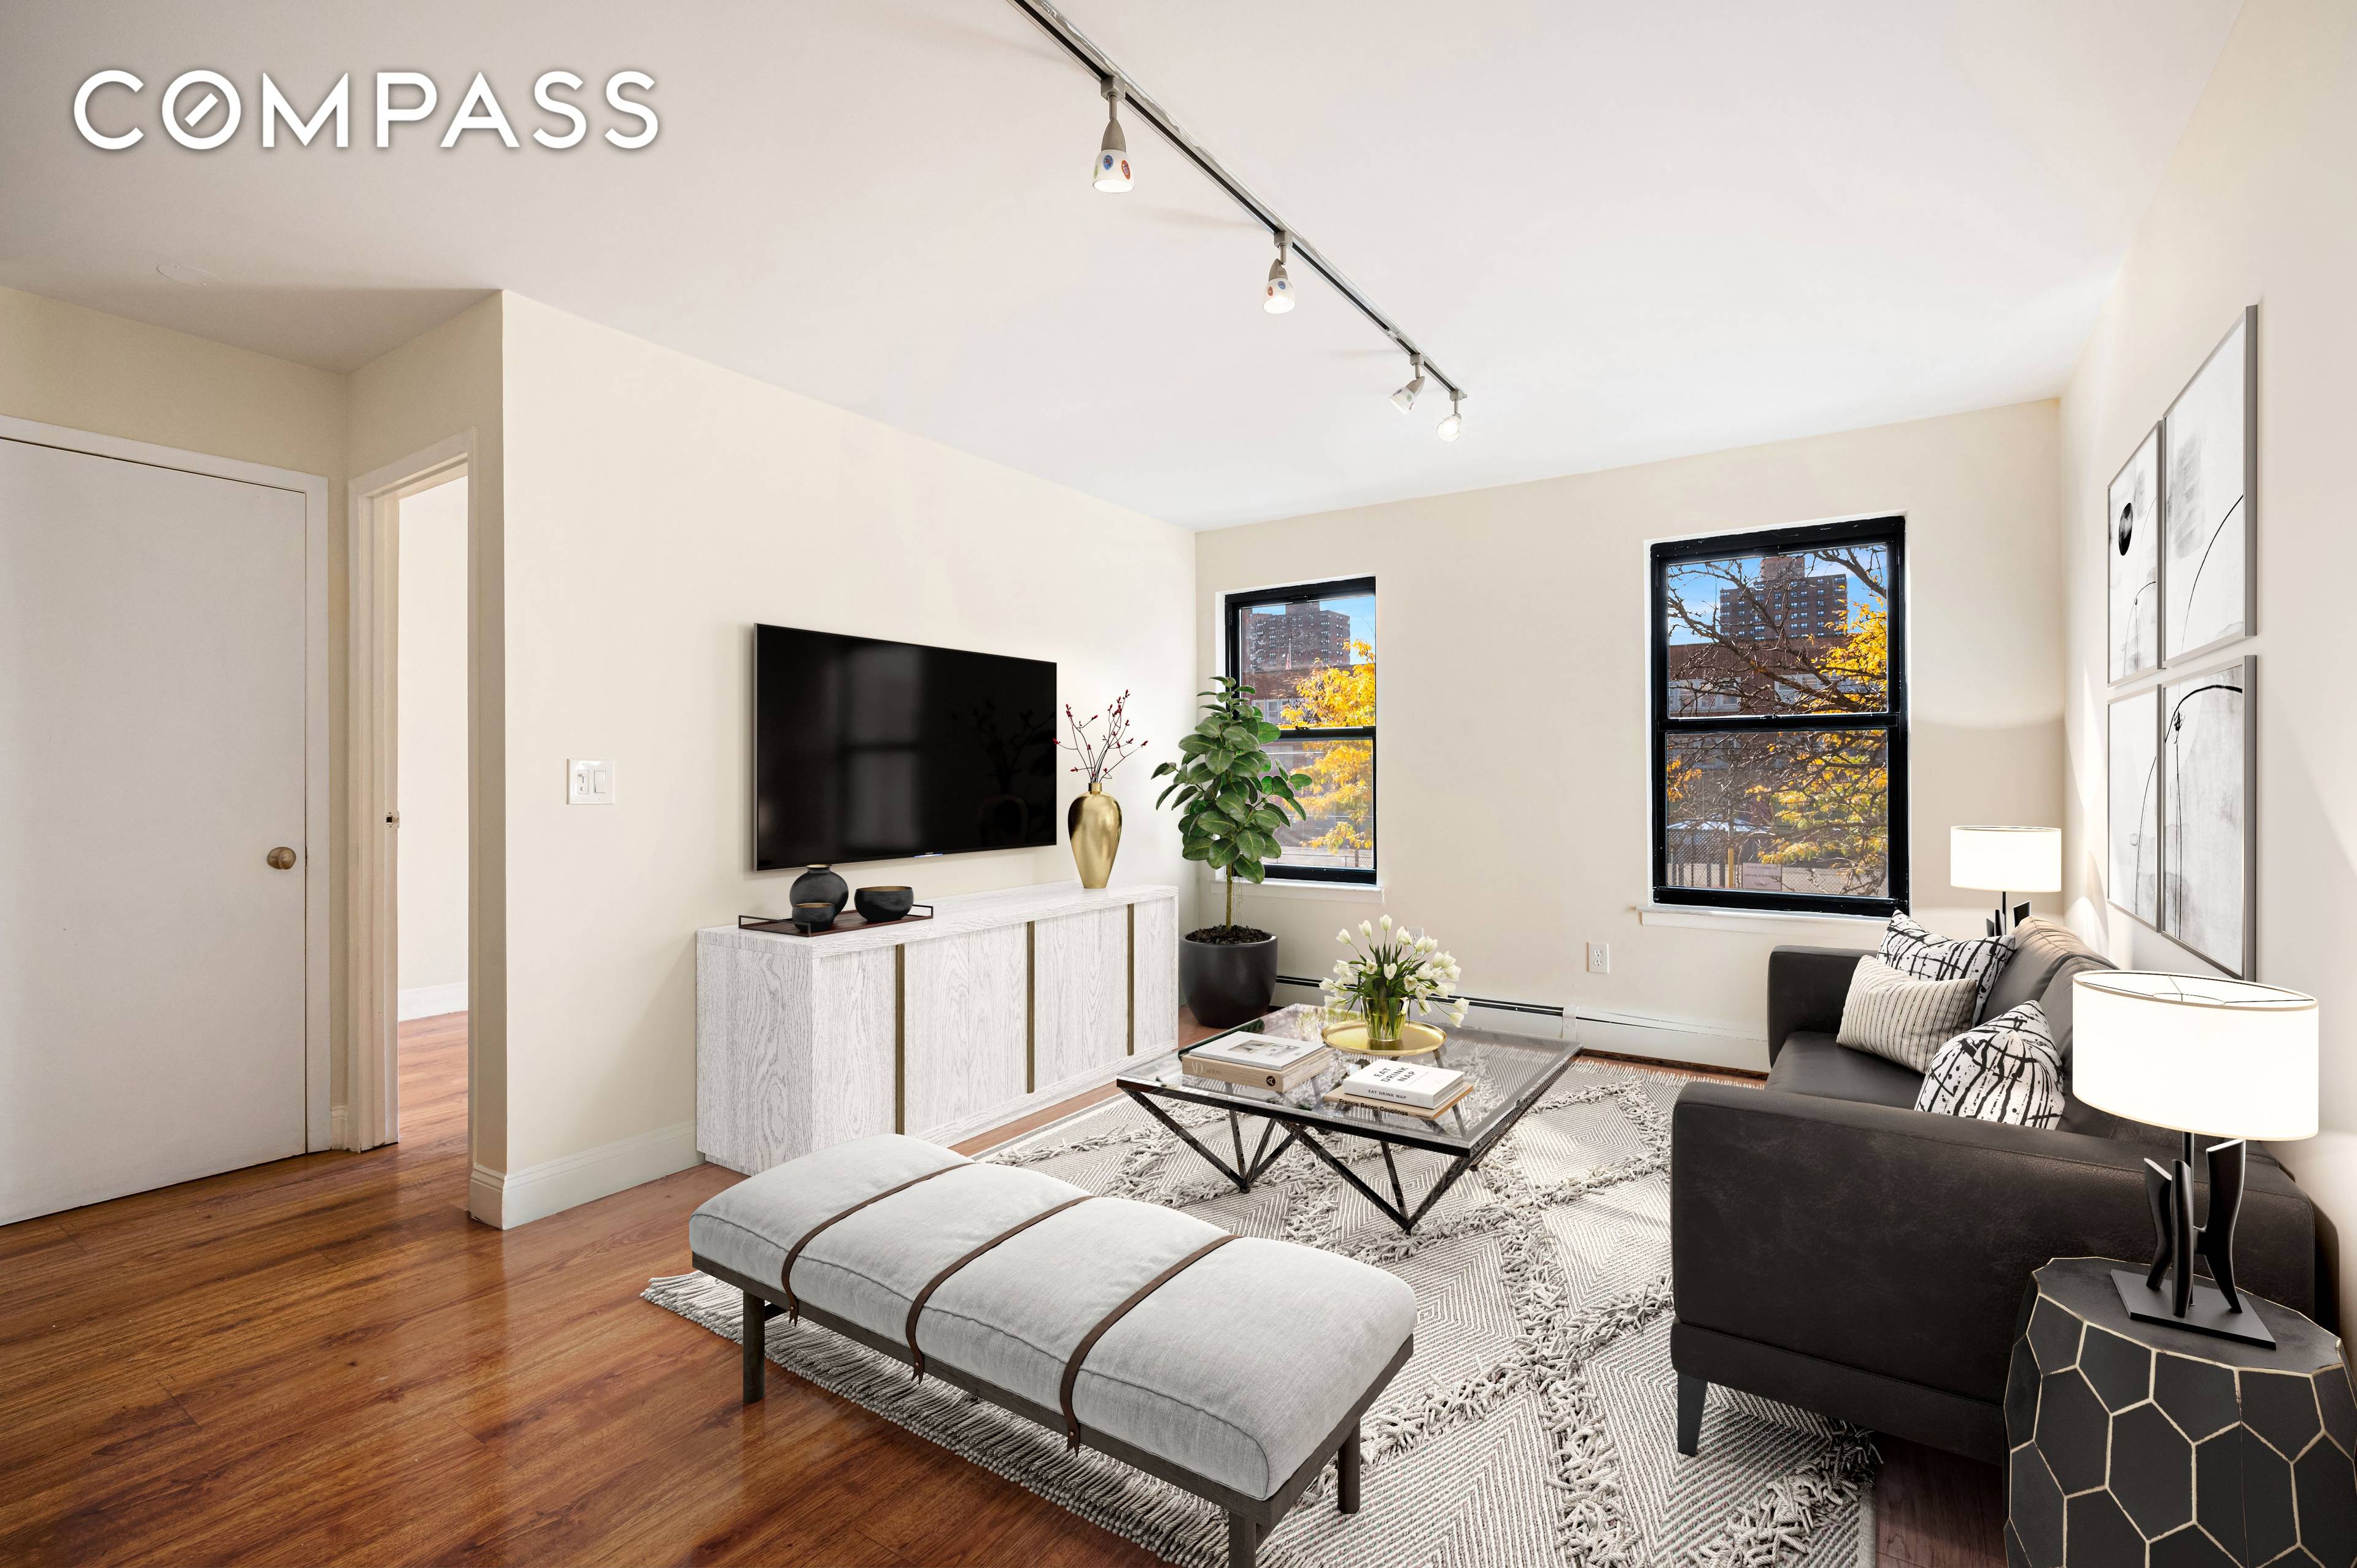 Introducing 225 East 110th Street, a charming South facing three story townhouse nestled within the heart of East Harlem's vibrant El Barrio neighborhood.